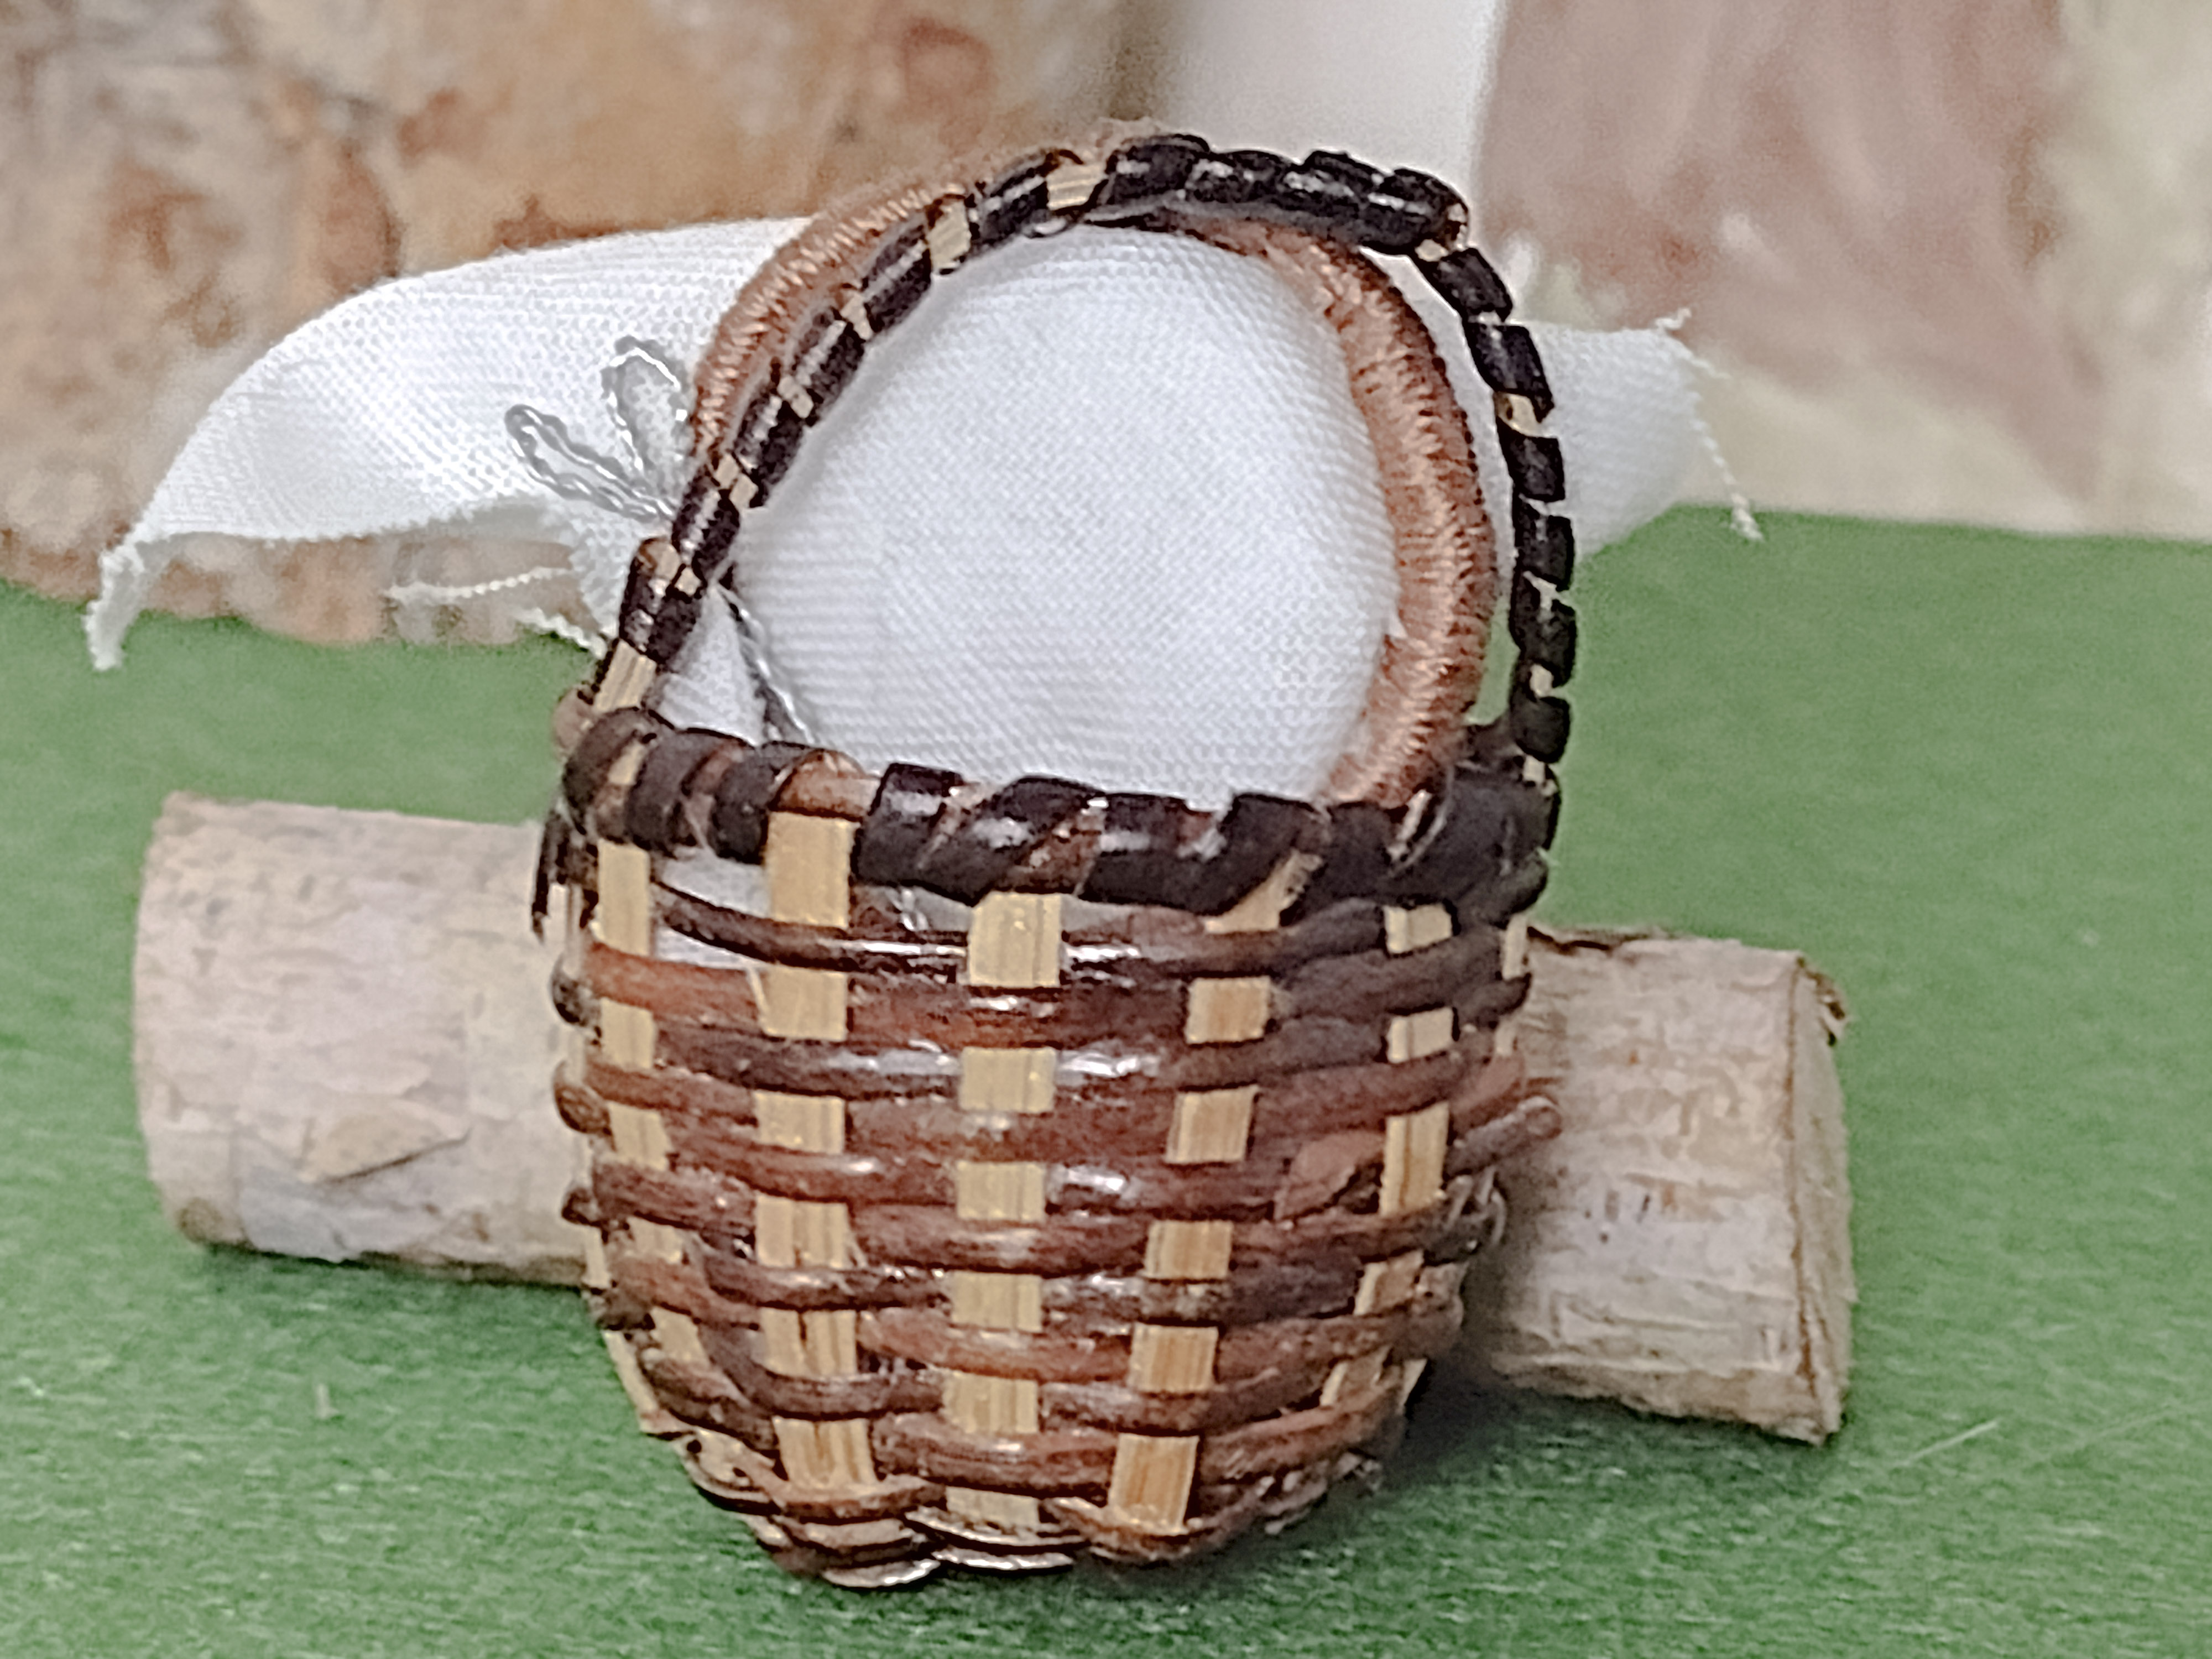 Tiny basket With Embroidery hoop, needle and siccors